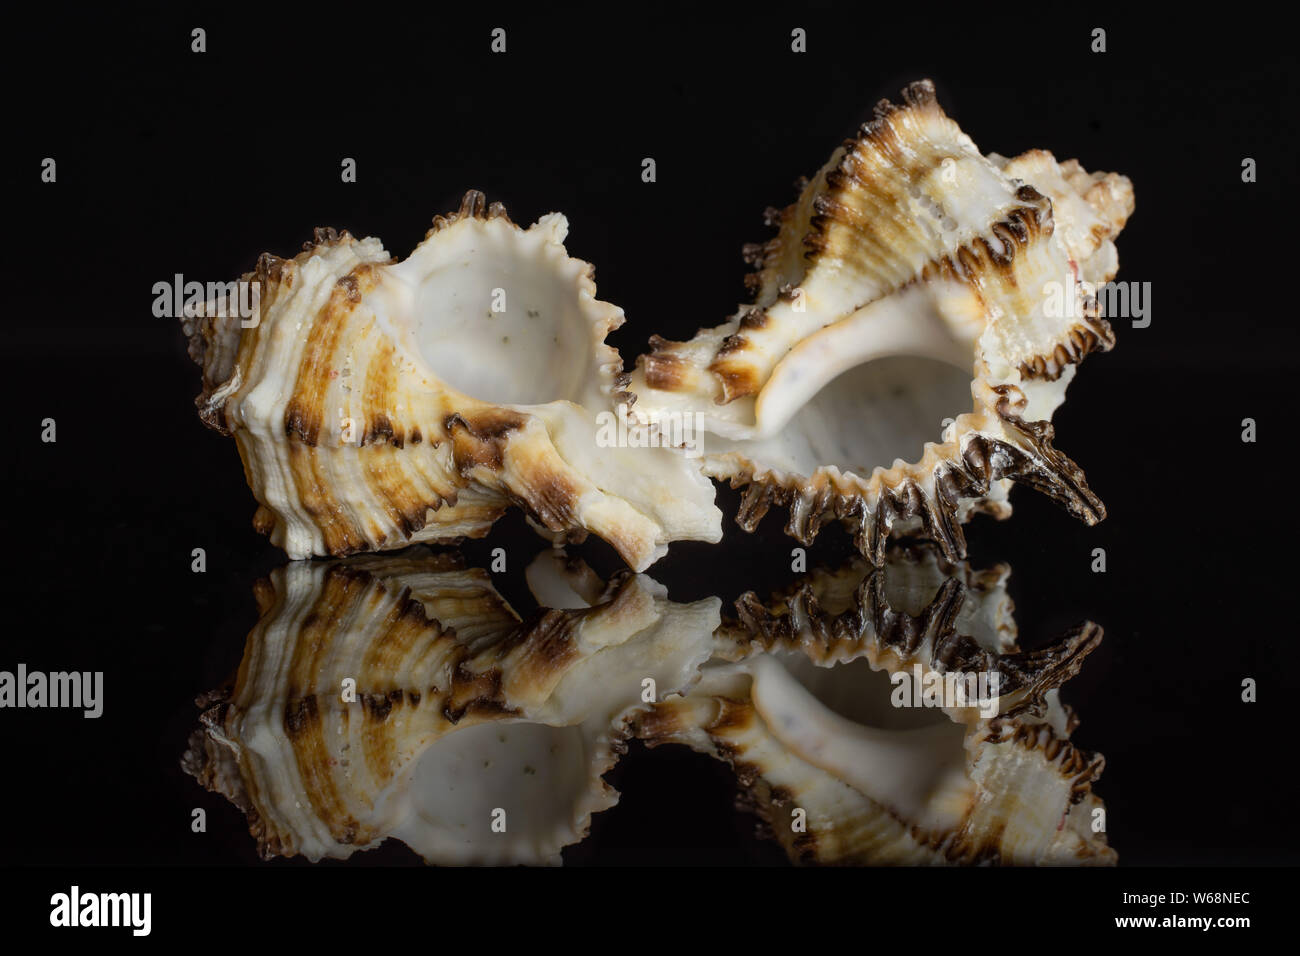 Group of two whole mollusc shell isolated on black glass Stock Photo